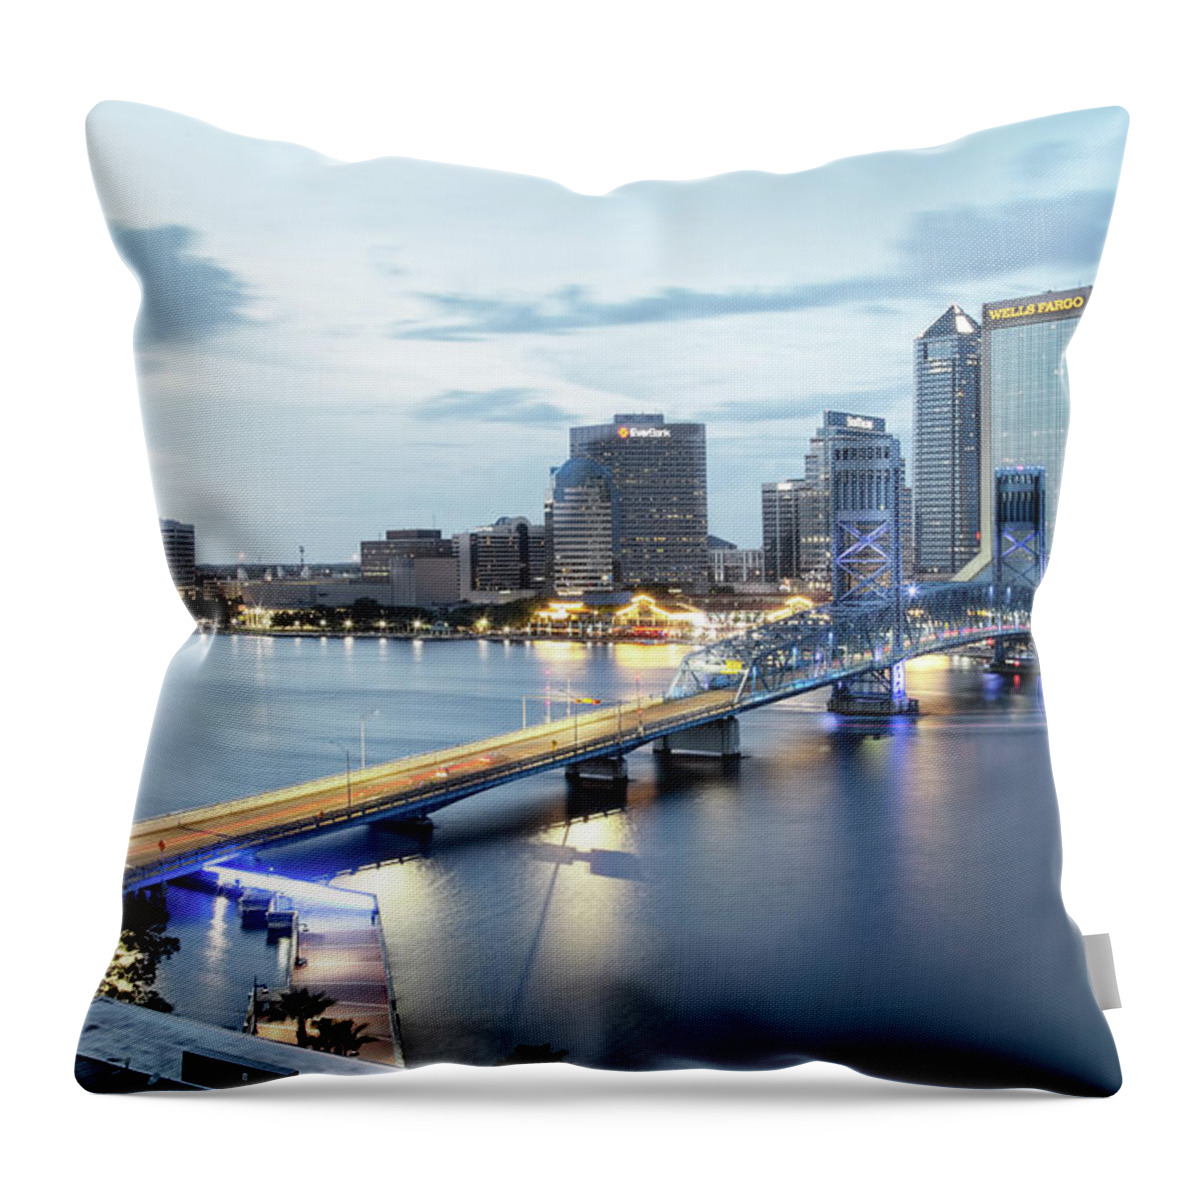 Jacksonville Throw Pillow featuring the photograph Blue Hour In Jacksonville by Kay Brewer